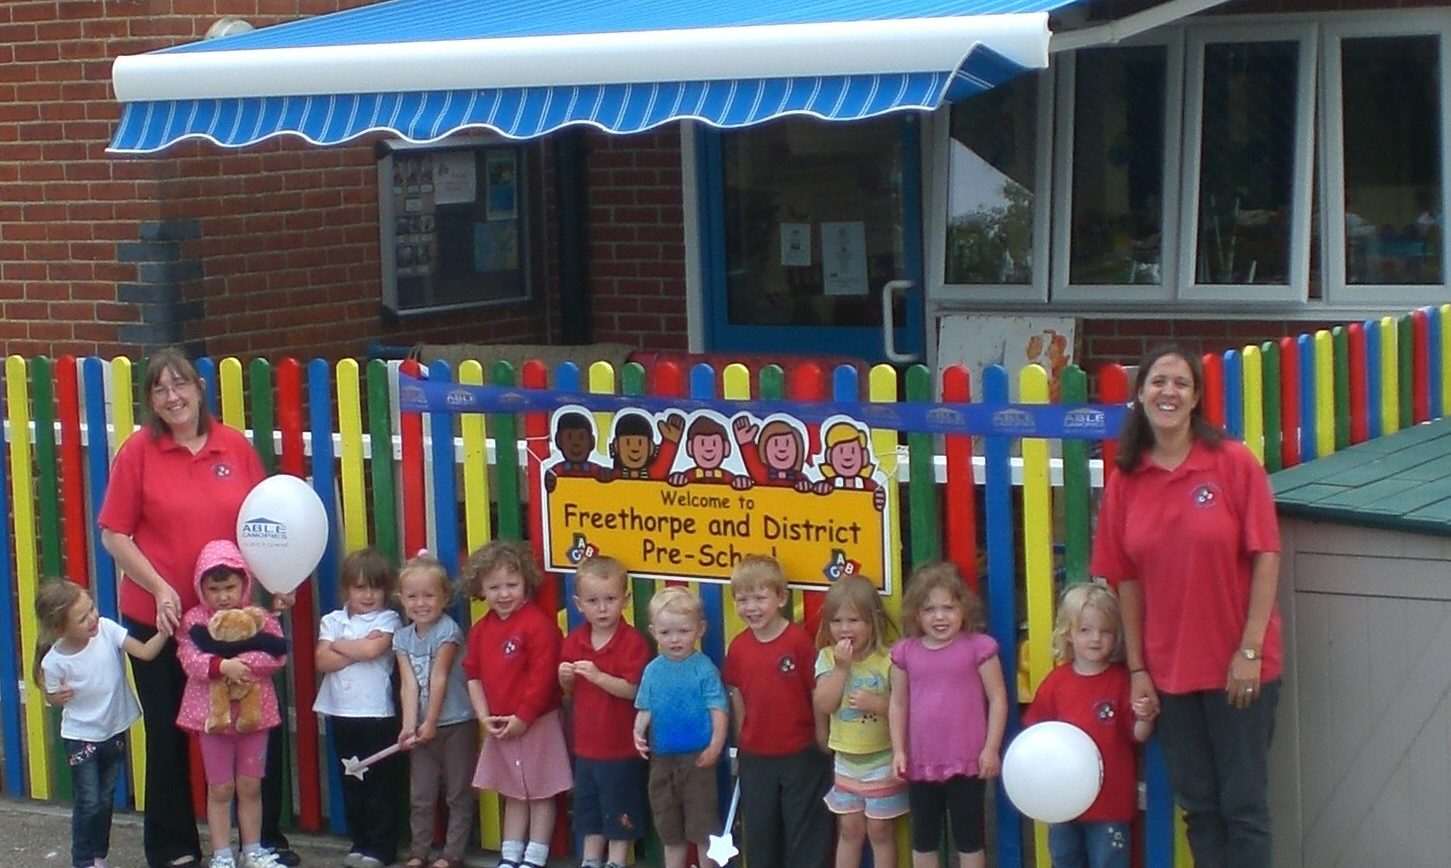 “Our awning has made a huge difference to our pre-school.”